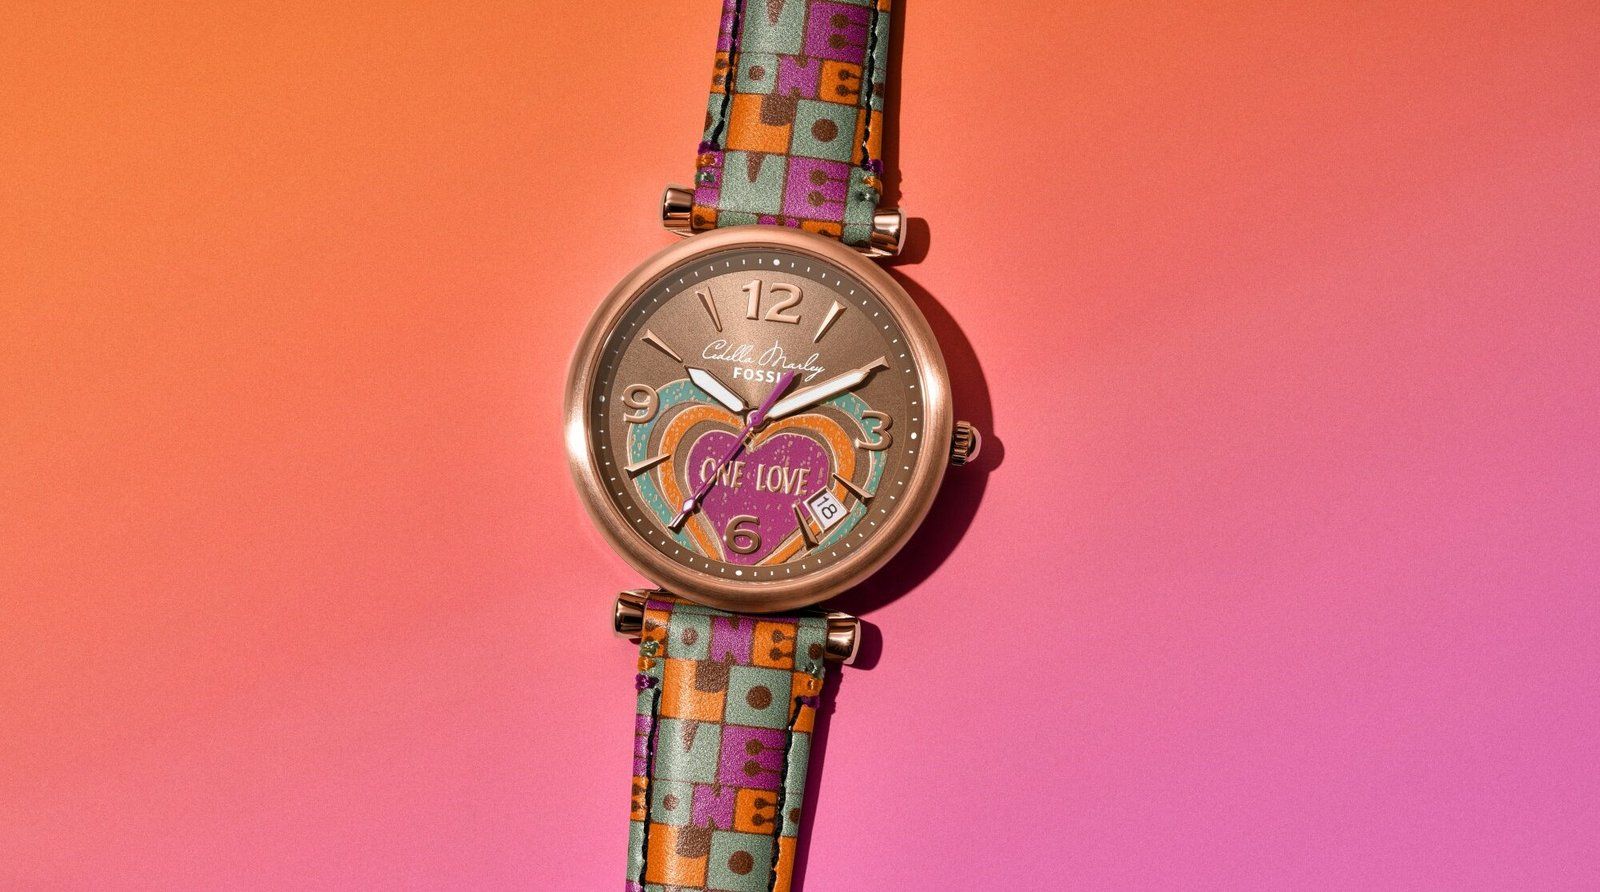 The Cedella Marley x Fossil Watch_ Honouring International Women’s Day